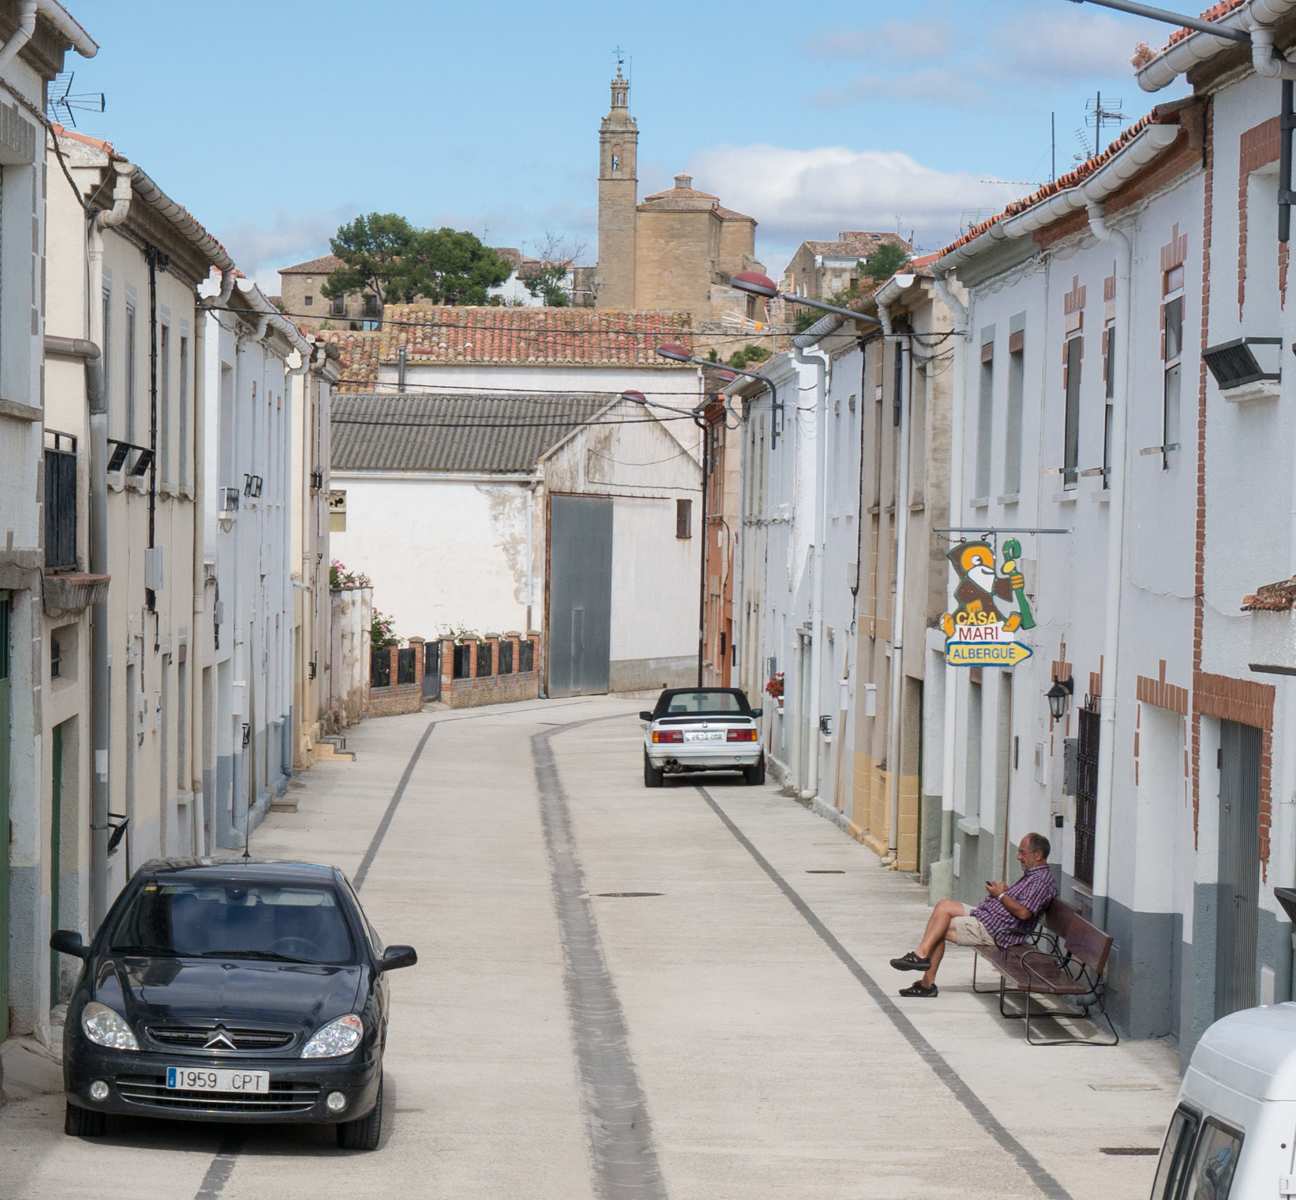 East-northeast view along the Calle Nueva (in Torres del Rio, Spain) on which to the right is located the Albergue Casa Mari | Photo by Mike Hudak